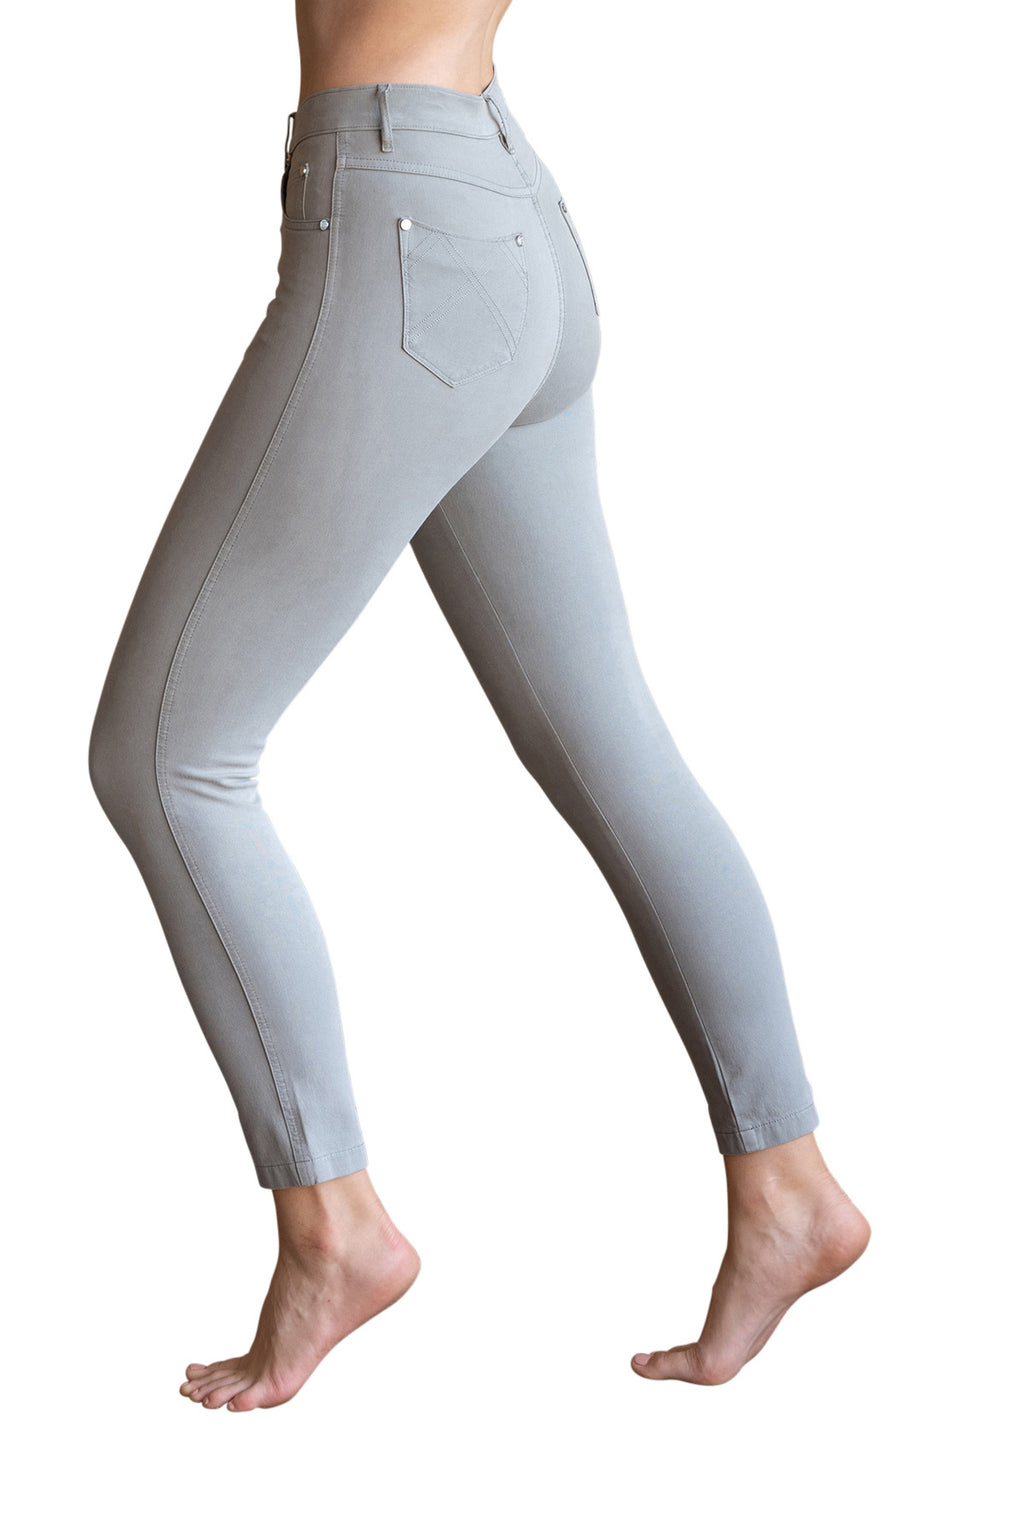 Discover the ultimate comfort and style with our Marble 7/8 Jeans. Crafted with a cotton-rich fabric, these high-waisted jeans offer a luxurious feel and exceptional stretch in all directions. The 7/8 slim leg design flatters your figure while giving you a trendy, cropped look at 27". Upgrade your game and experience the perfect blend of comfort and fashion with our Marble 7/8 Jeans